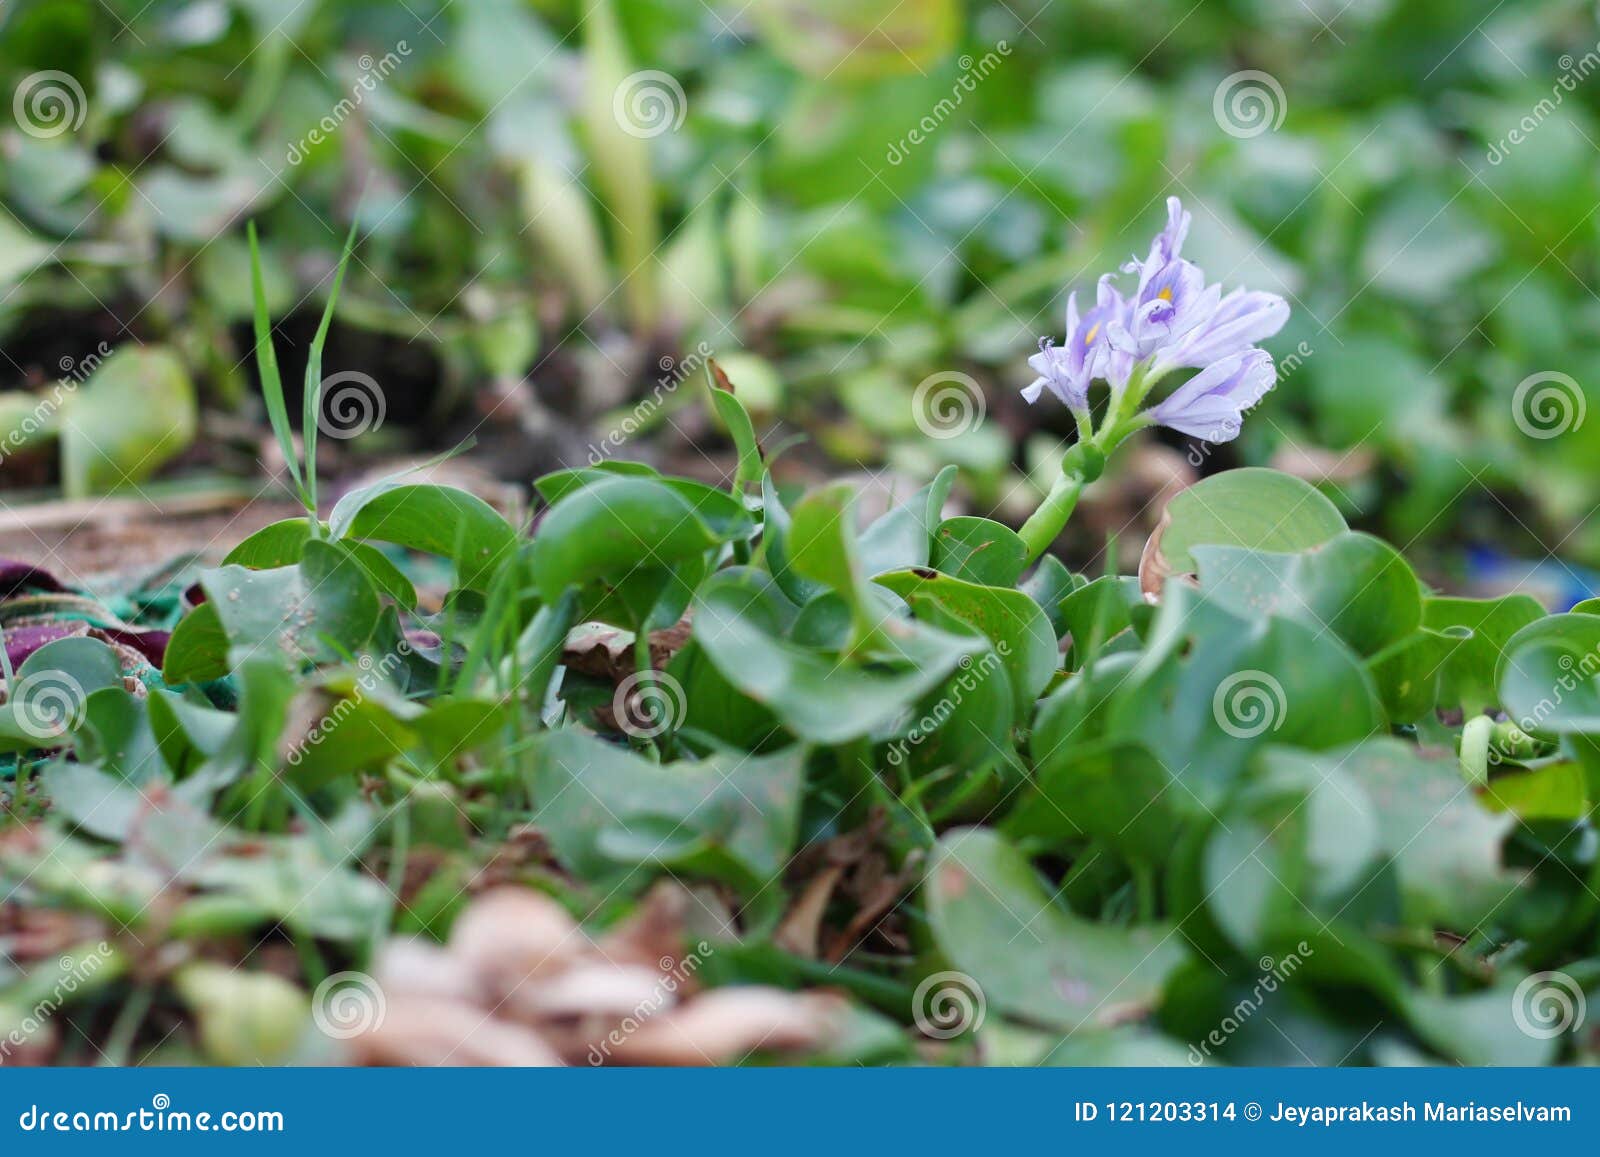  eichornia plant with flower - common water hyacinth